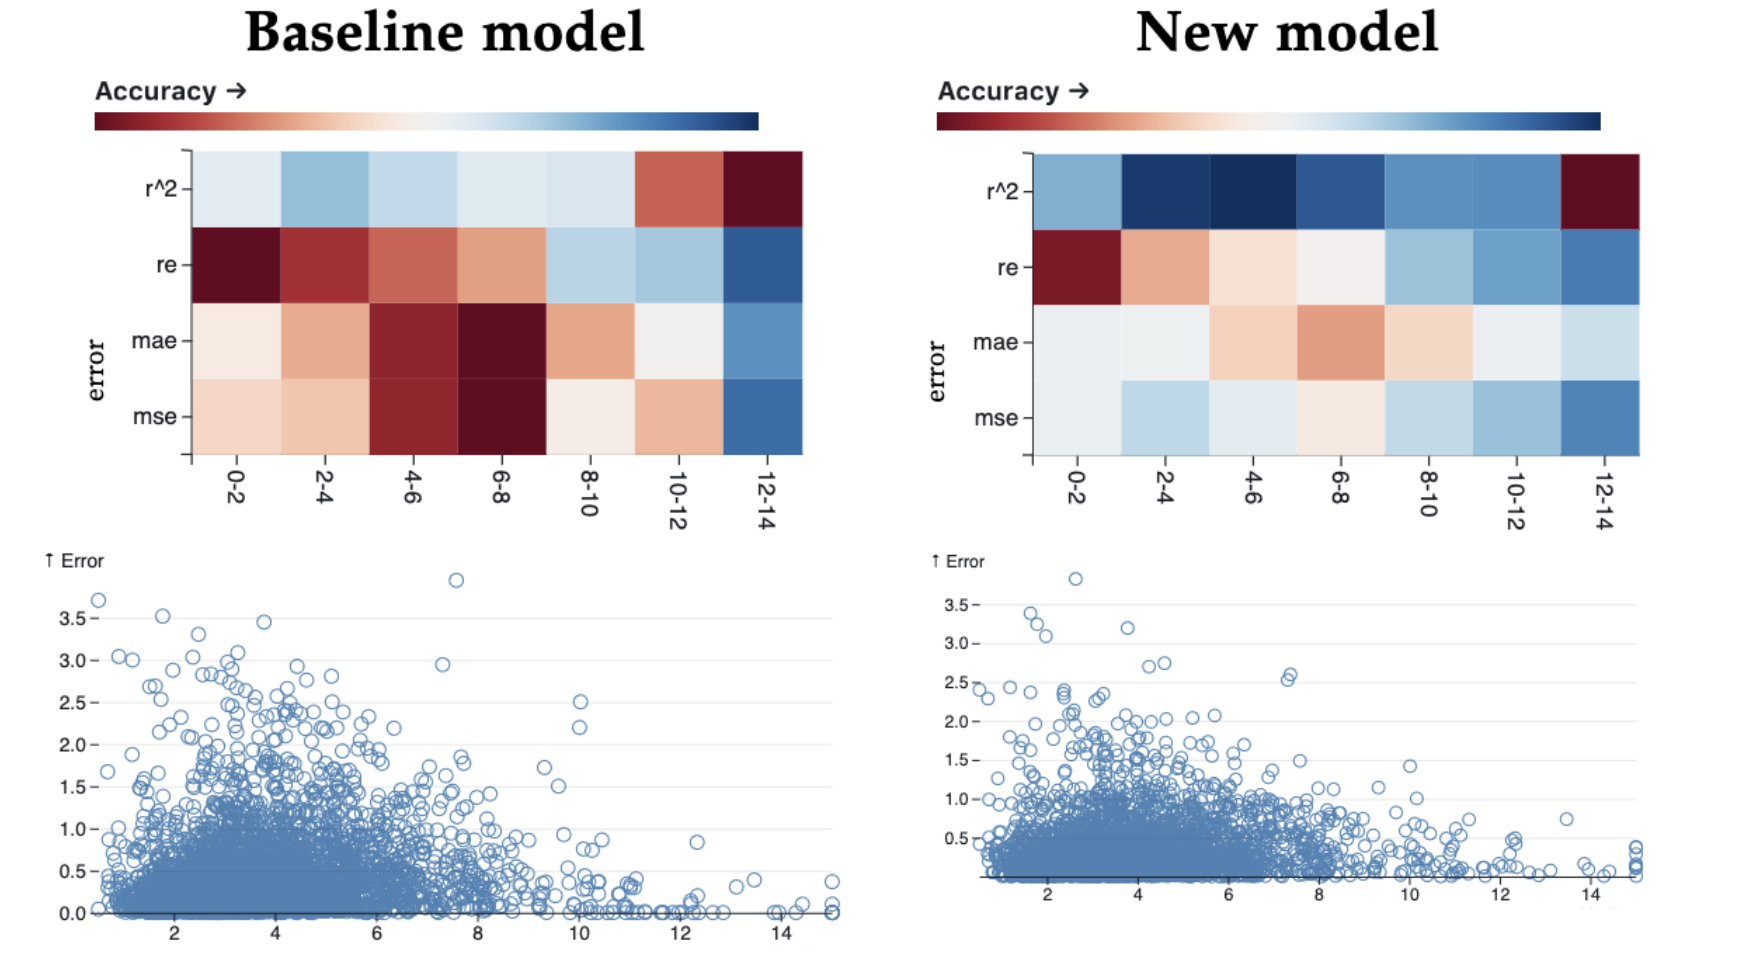 A visual comparison of the performance of a new model against a baseline model